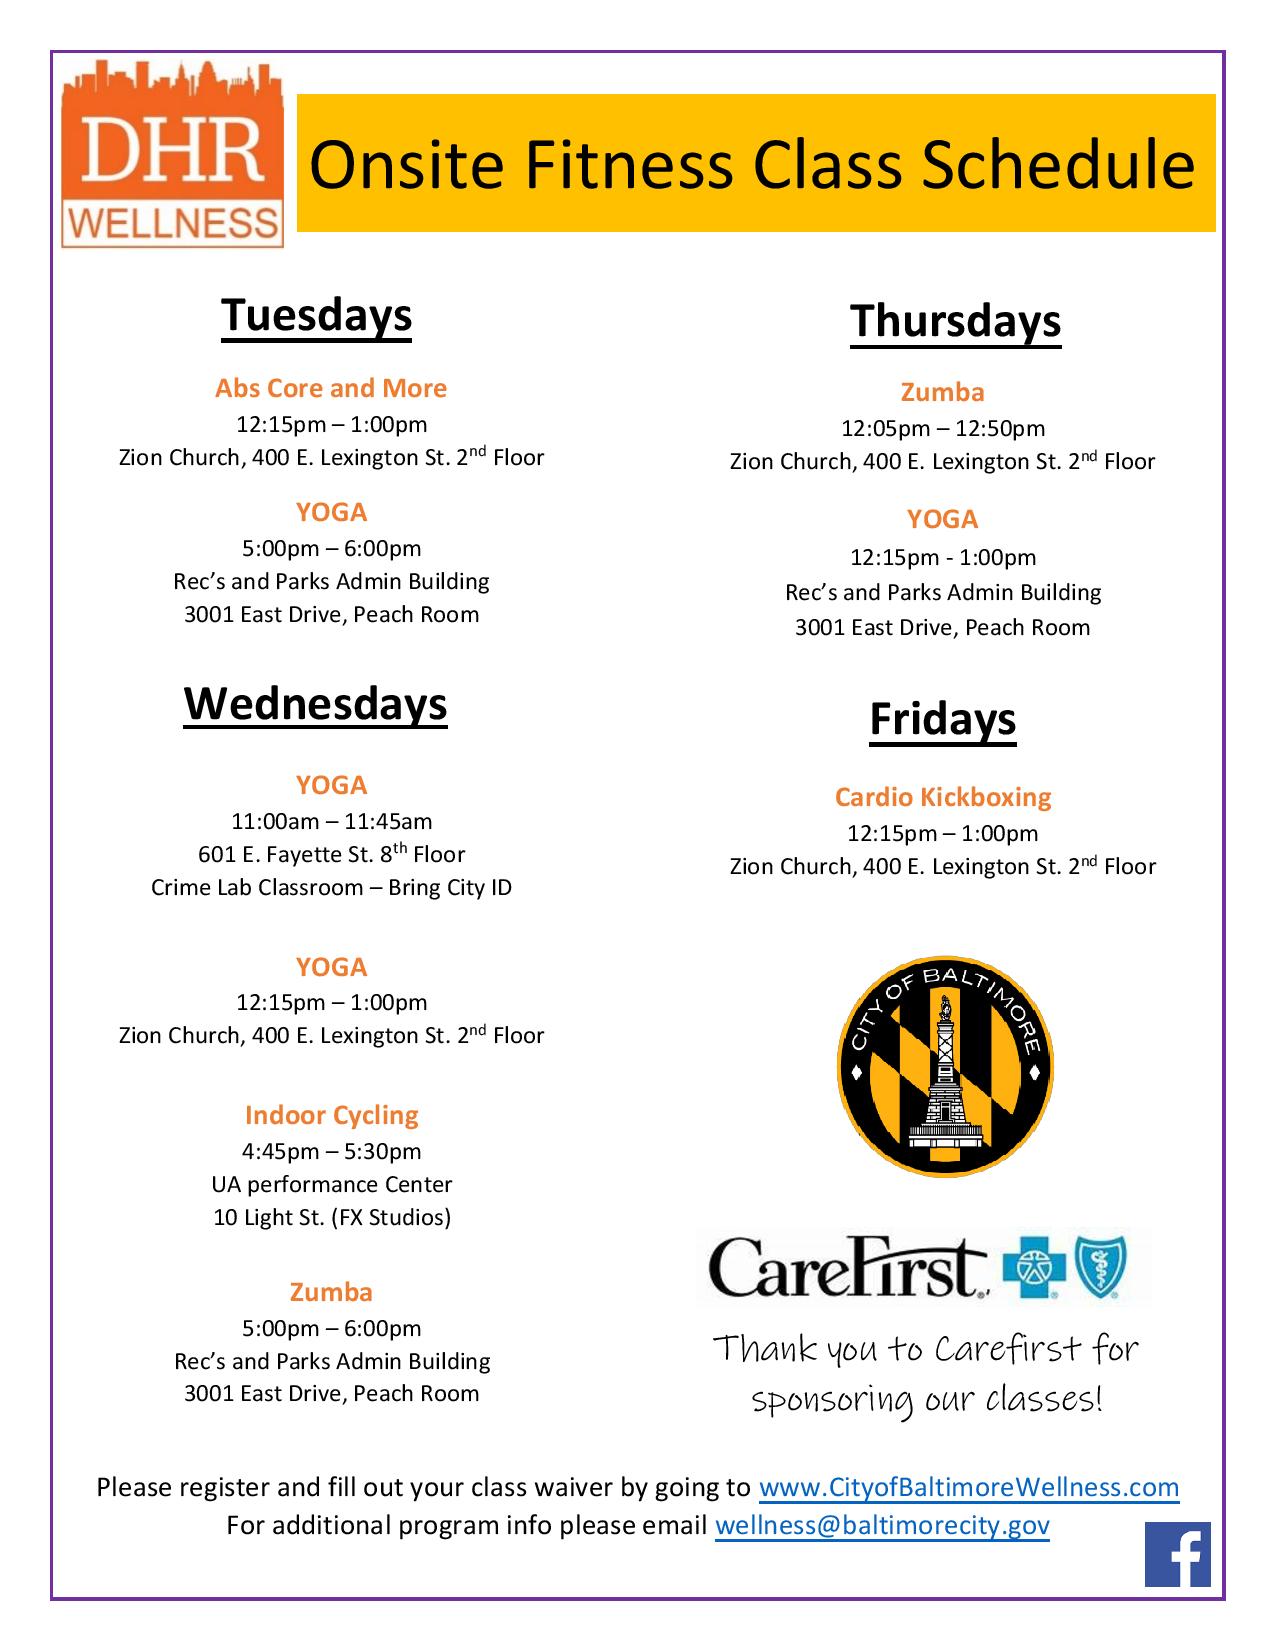 Flyer for Onsite Fitness Classes